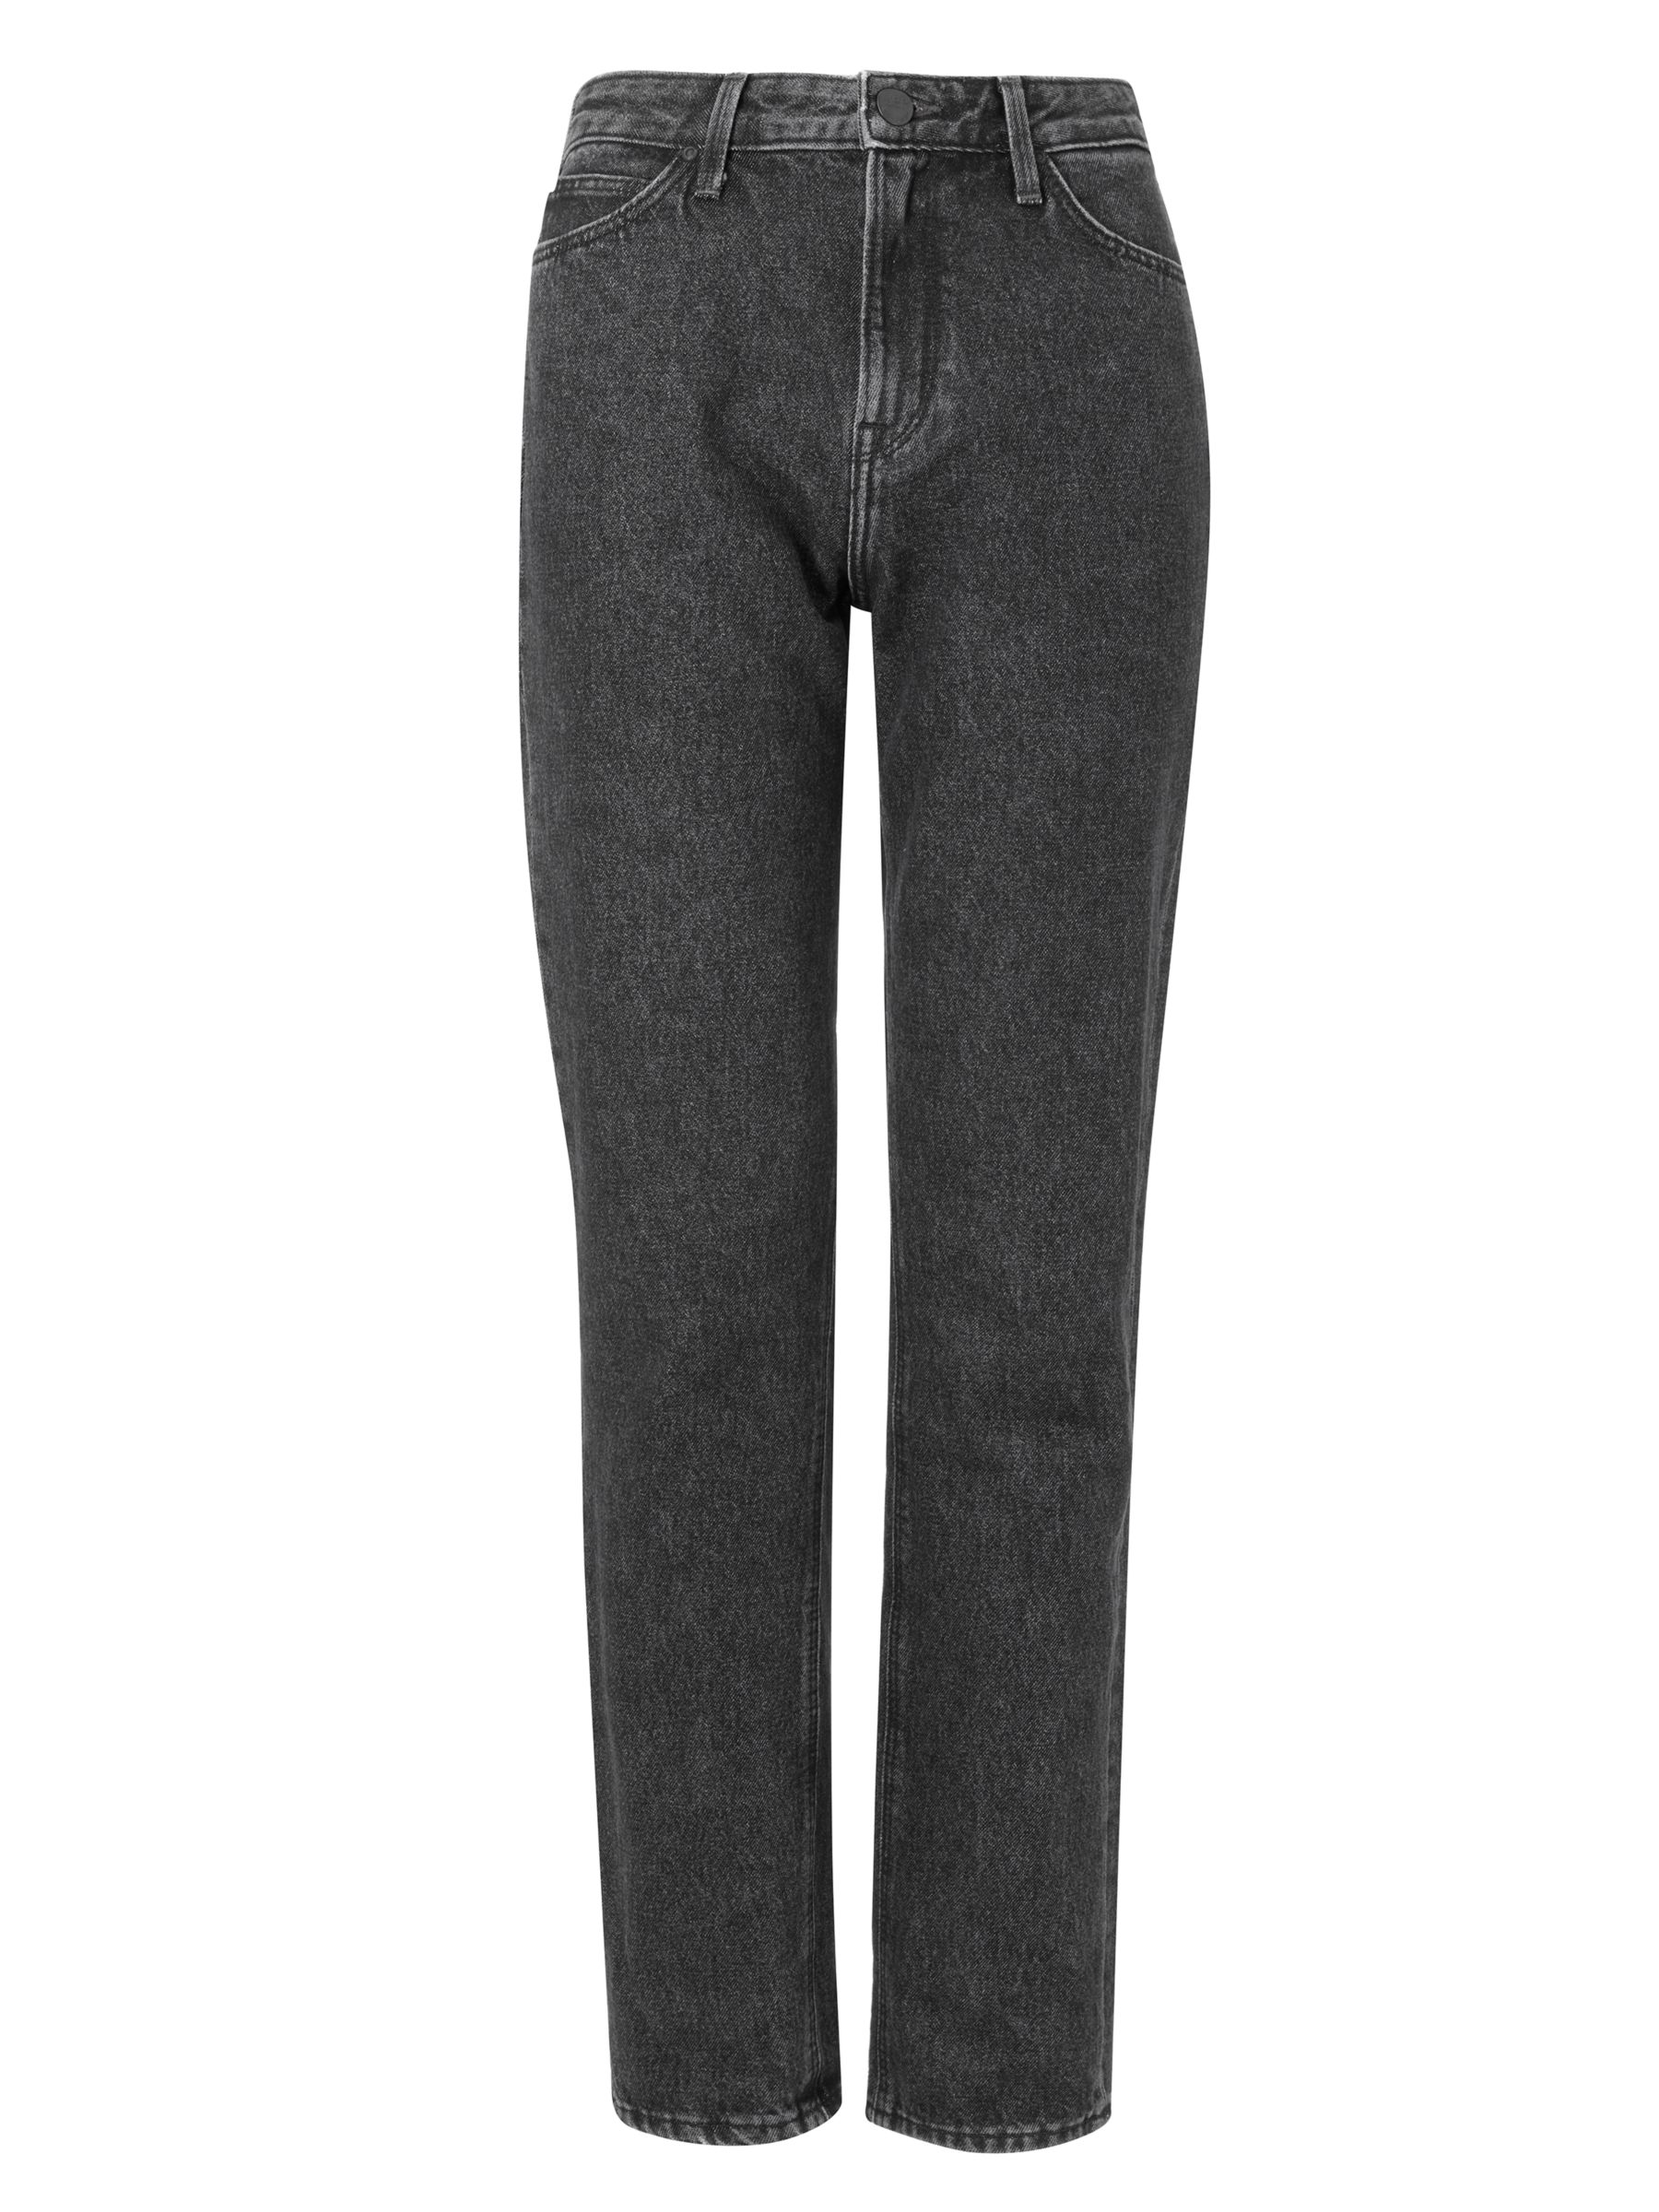 Lee Mom Straight Relaxed Leg Jeans, Black Stone, W29/L31